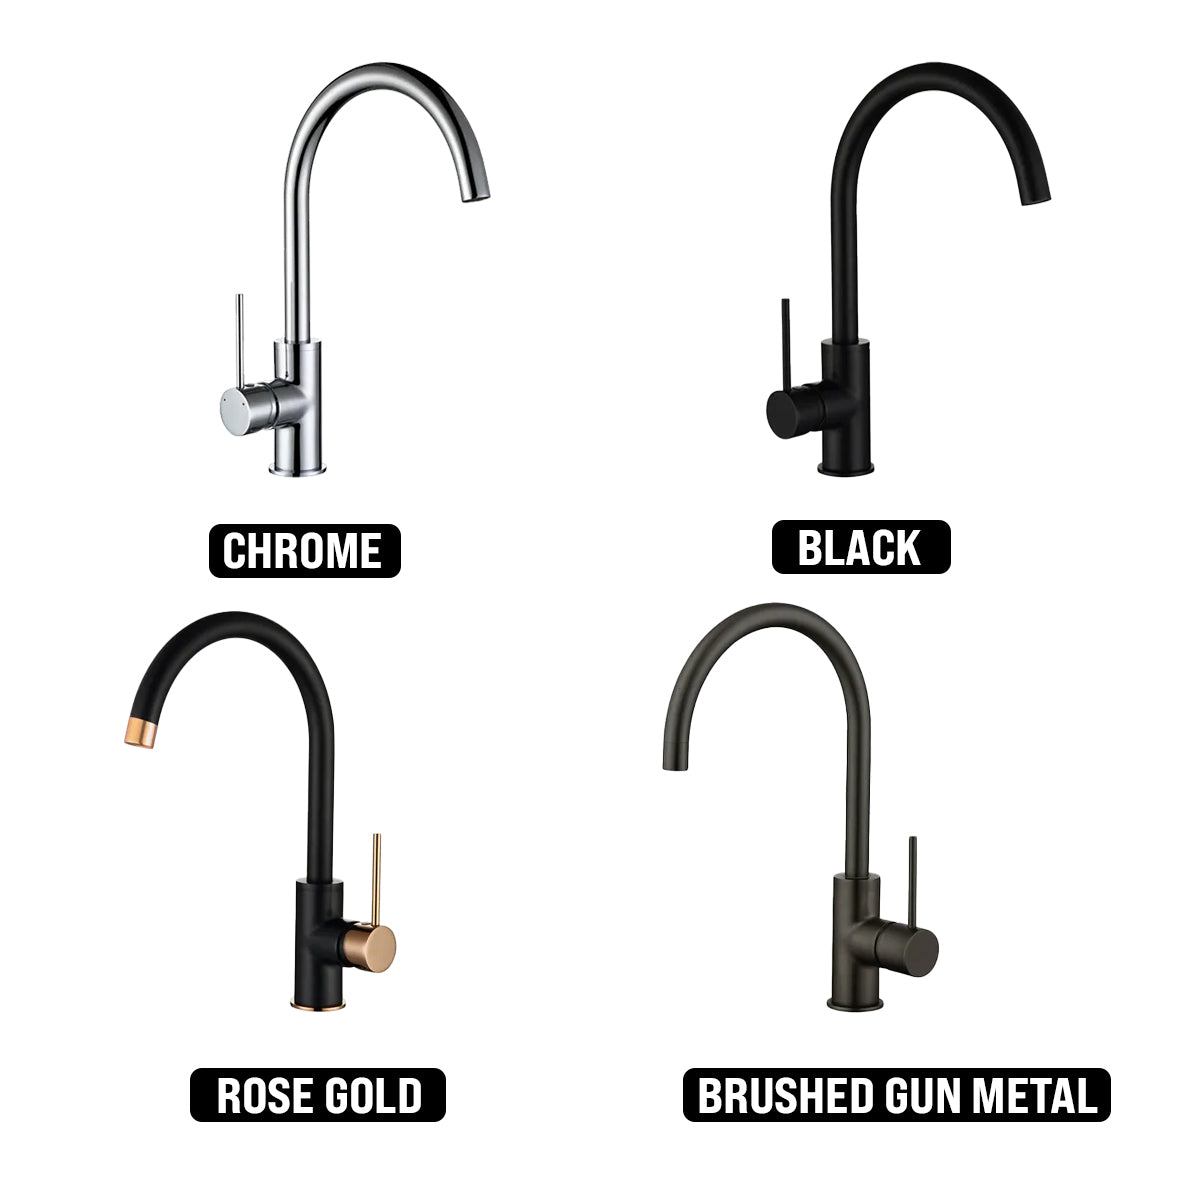 INSPIRE ROUL SINK MIXER CHROME